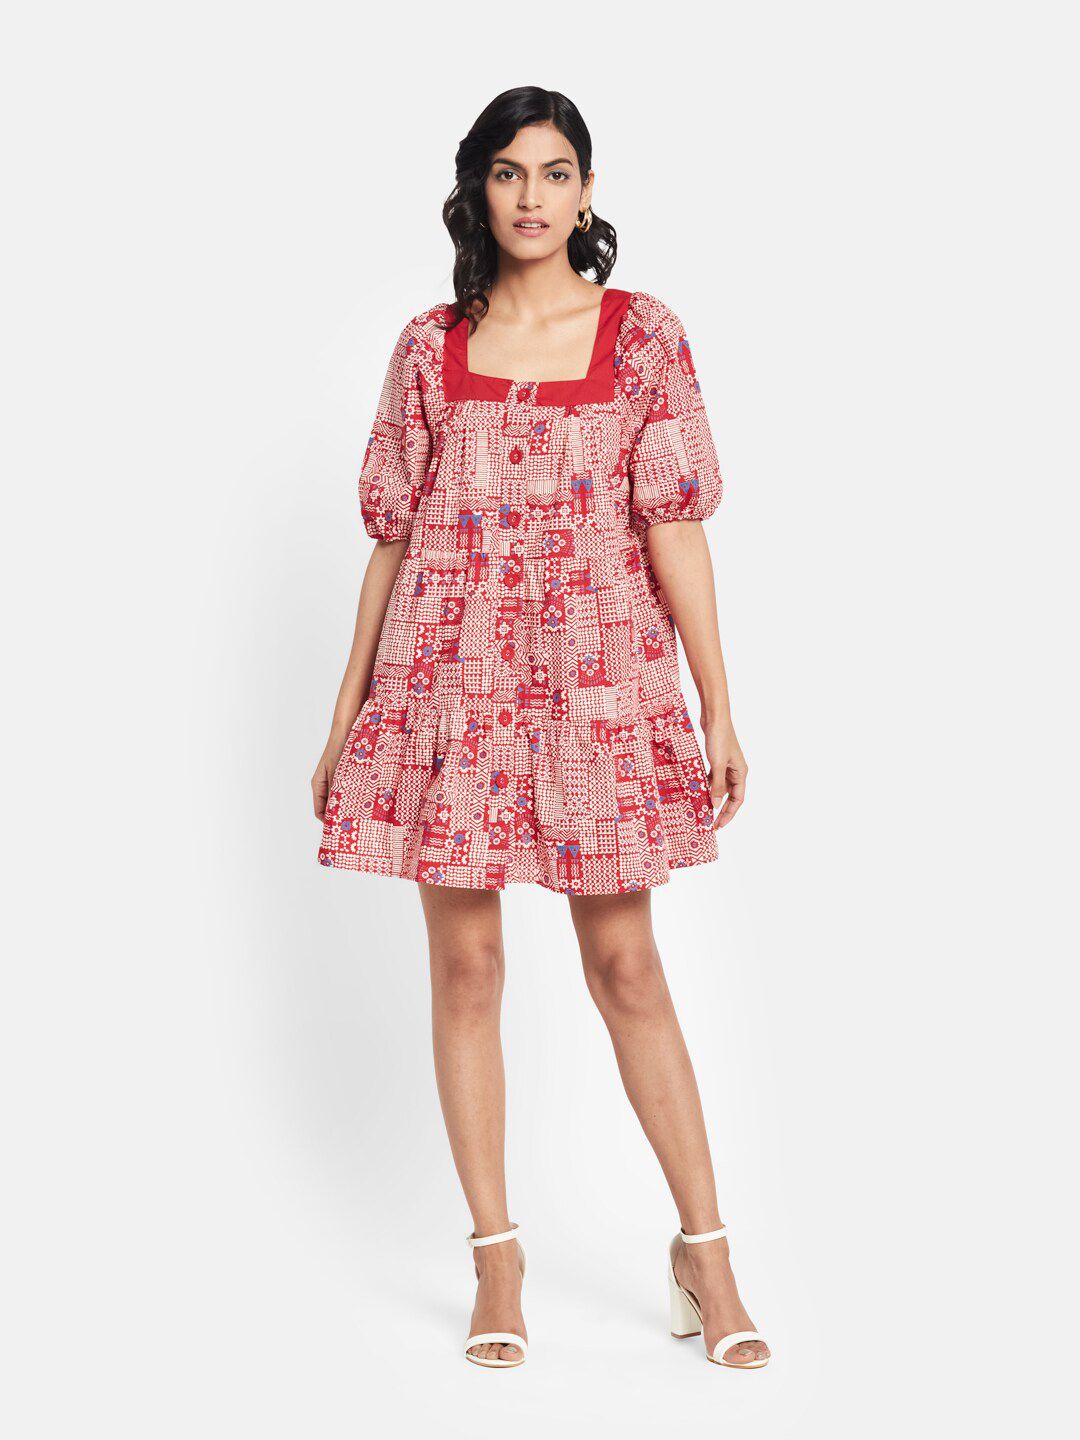 Fabindia Red & White Cotton Poplin Tiered A-Line Dress Price in India